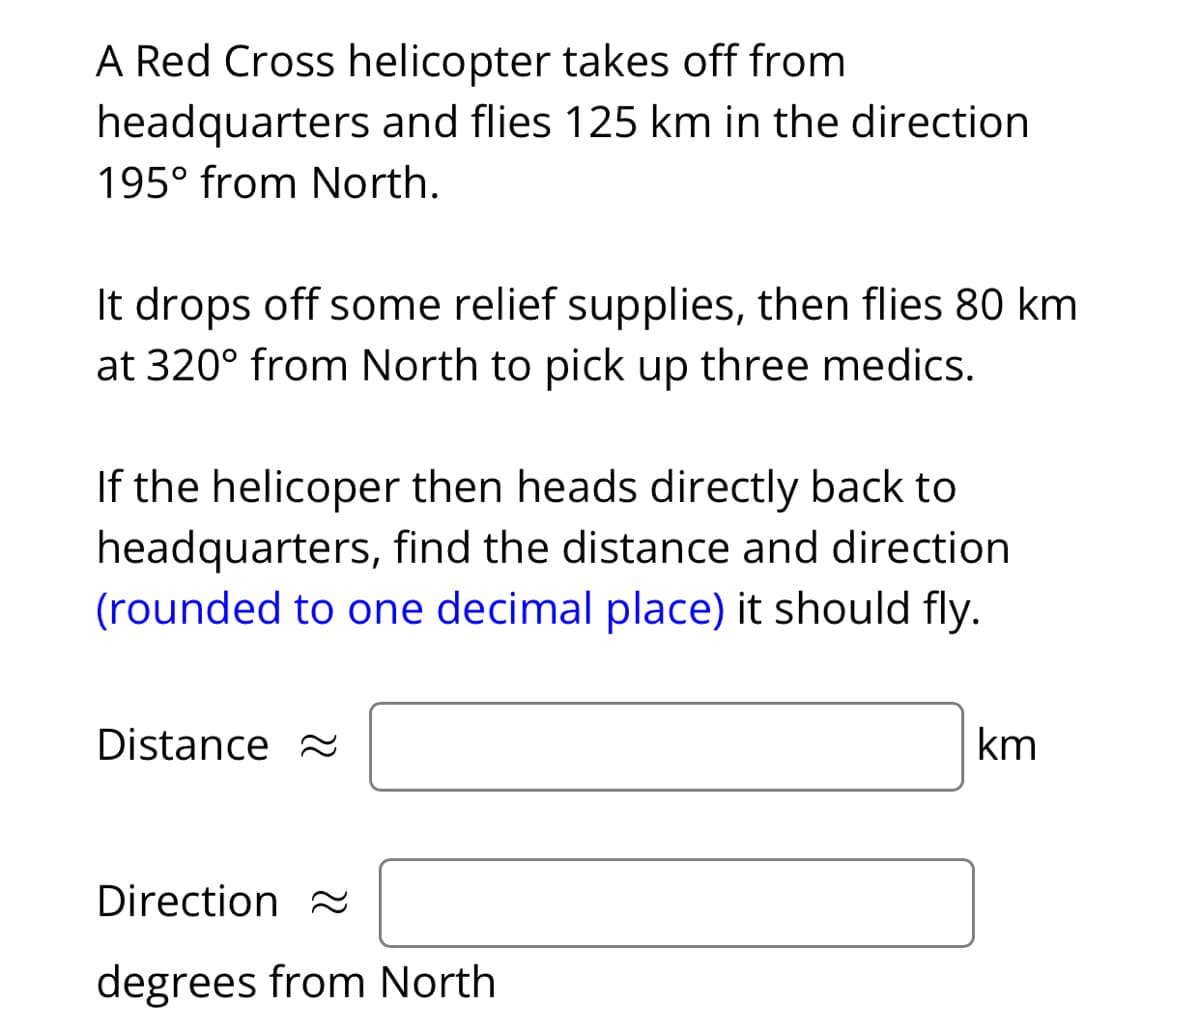 A Red Cross helicopter takes off from
headquarters and flies 125 km in the direction
195⁰ from North.
It drops off some relief supplies, then flies 80 km
at 320° from North to pick up three medics.
If the helicoper then heads directly back to
headquarters, find the distance and direction
(rounded to one decimal place) it should fly.
Distance
Direction
degrees from North
km